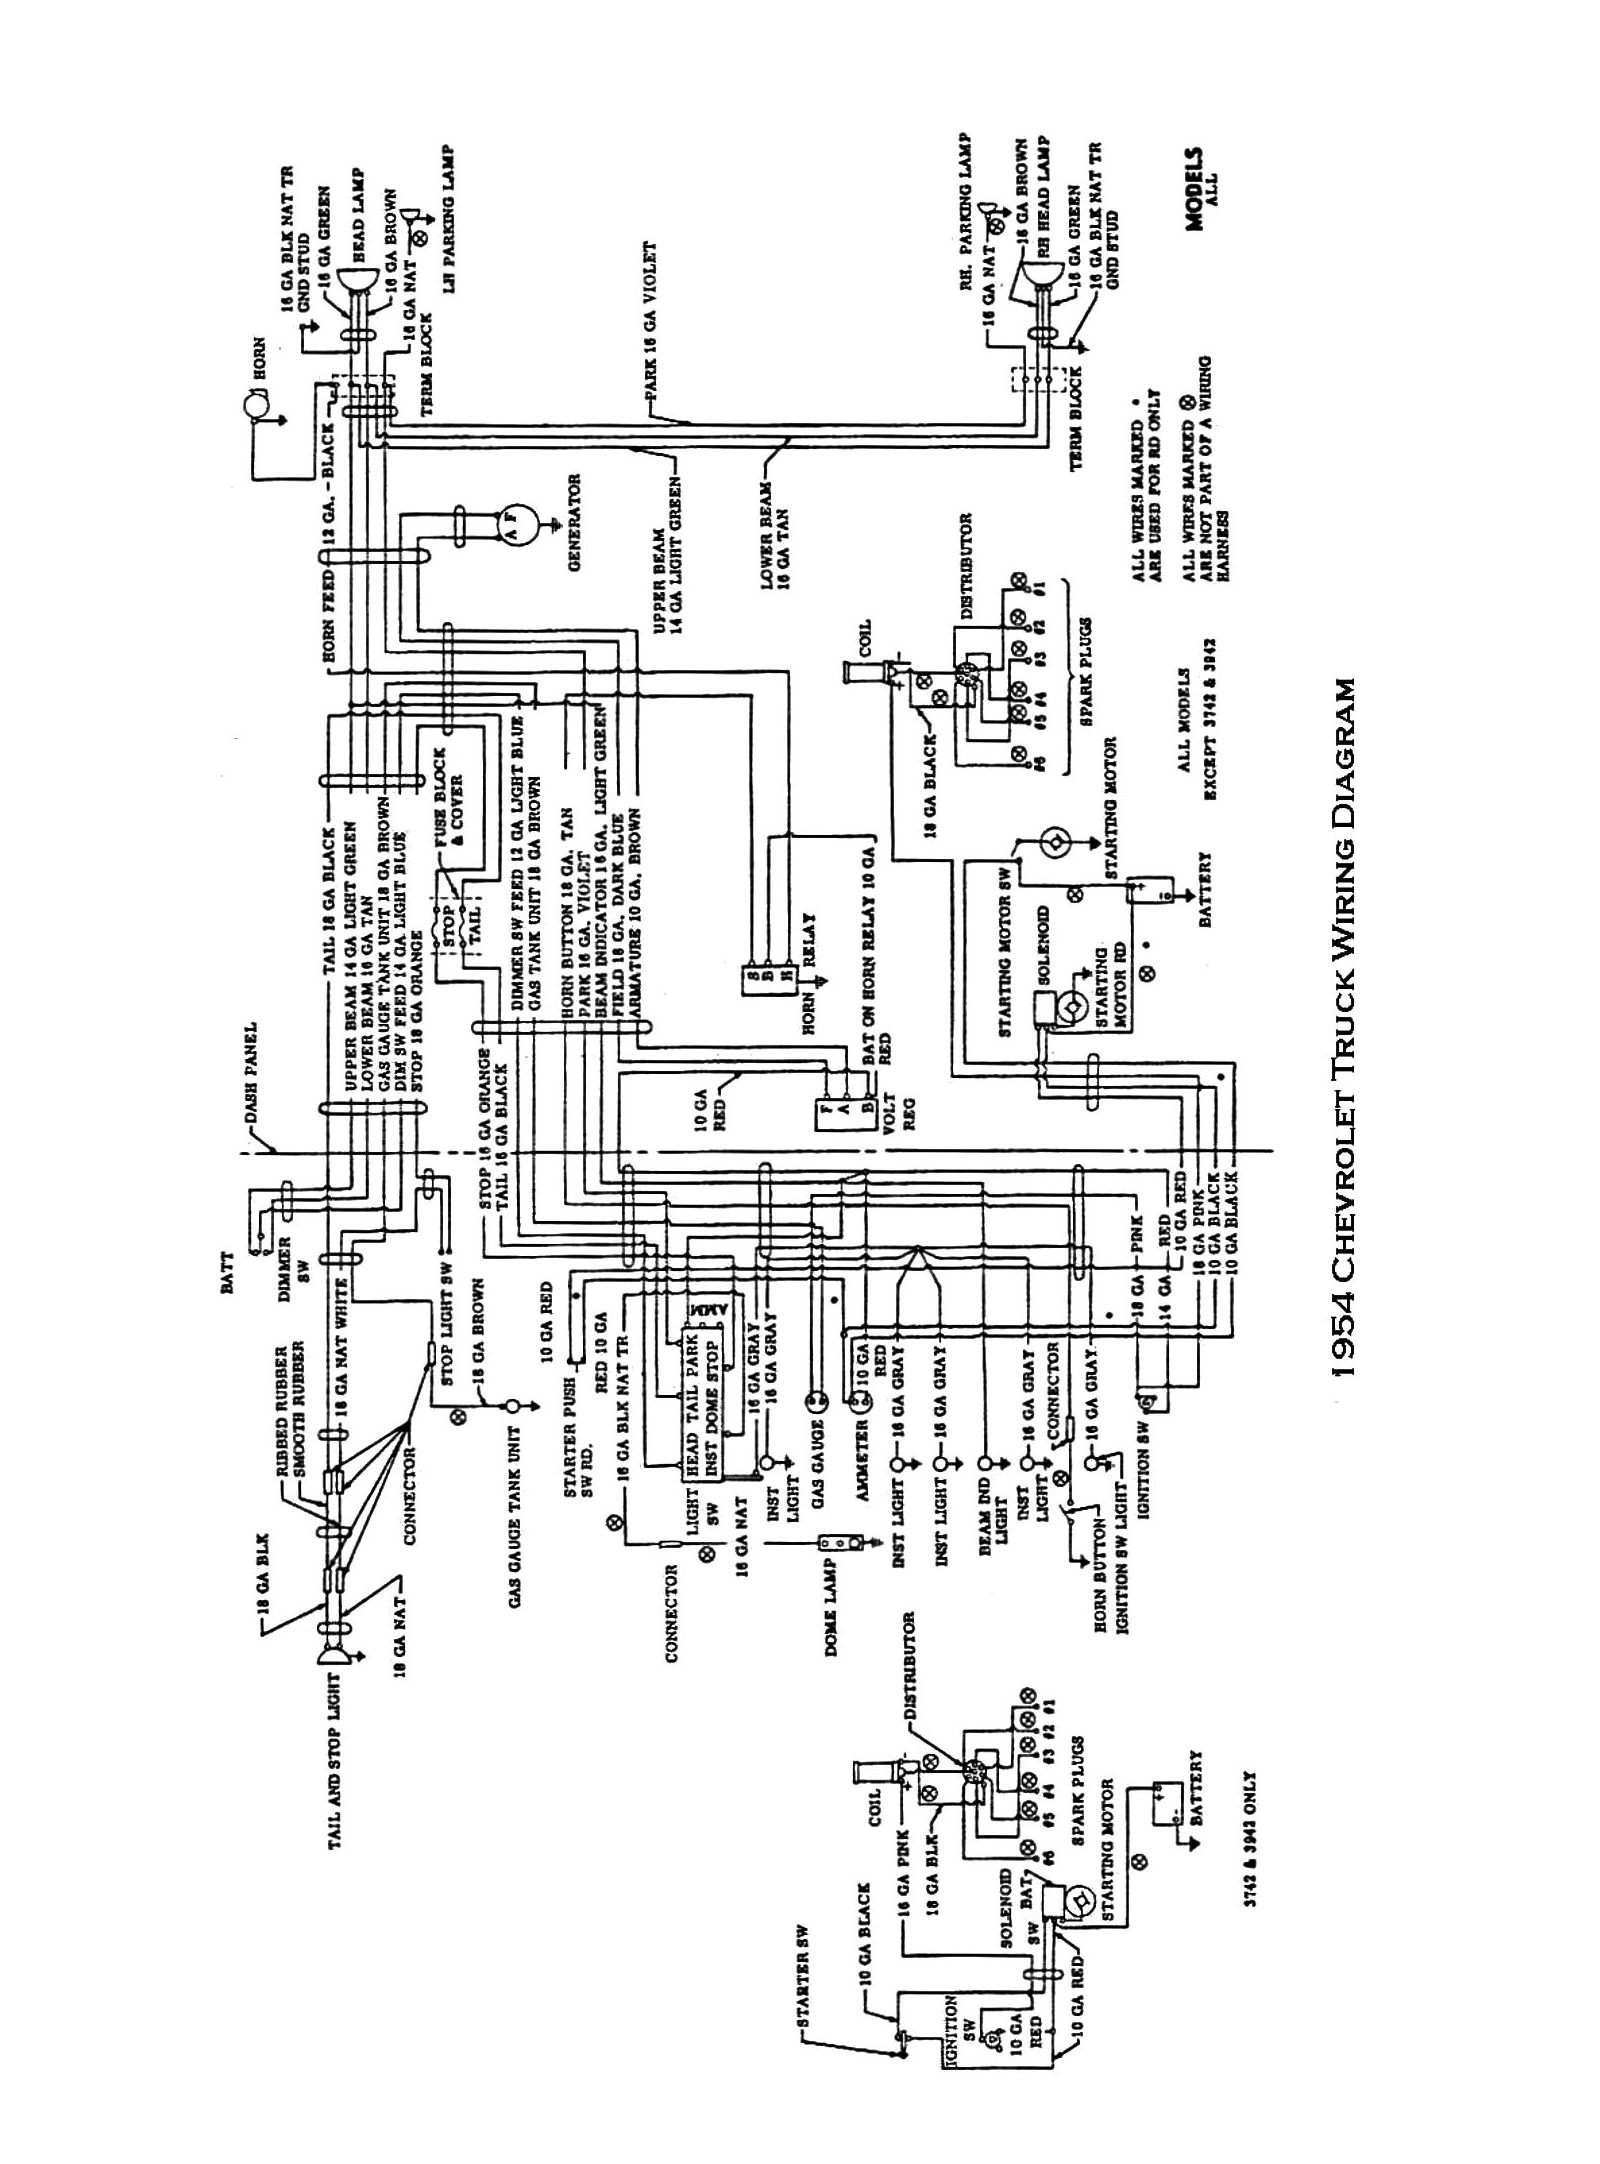 Chevy Wiring diagrams  Wiring Diagram For 1990 Chevy Pickup With Deisel Engine    Old Online Chevy Manuals